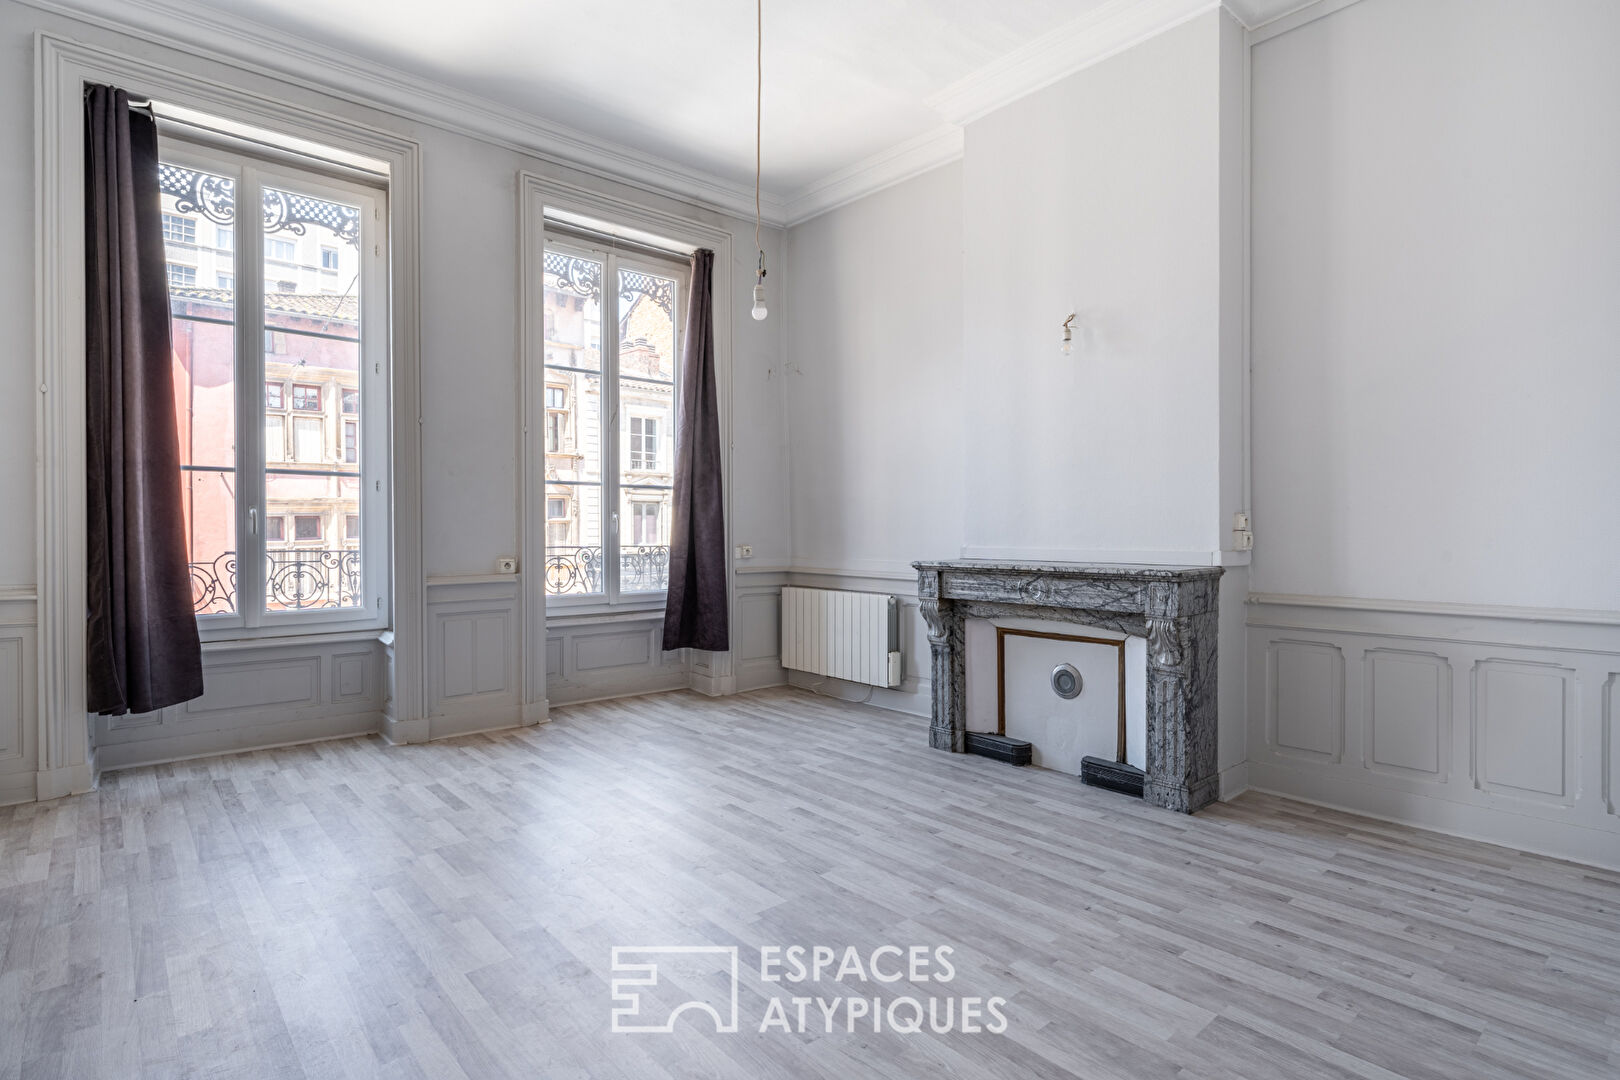 Apartment to refresh in the city center